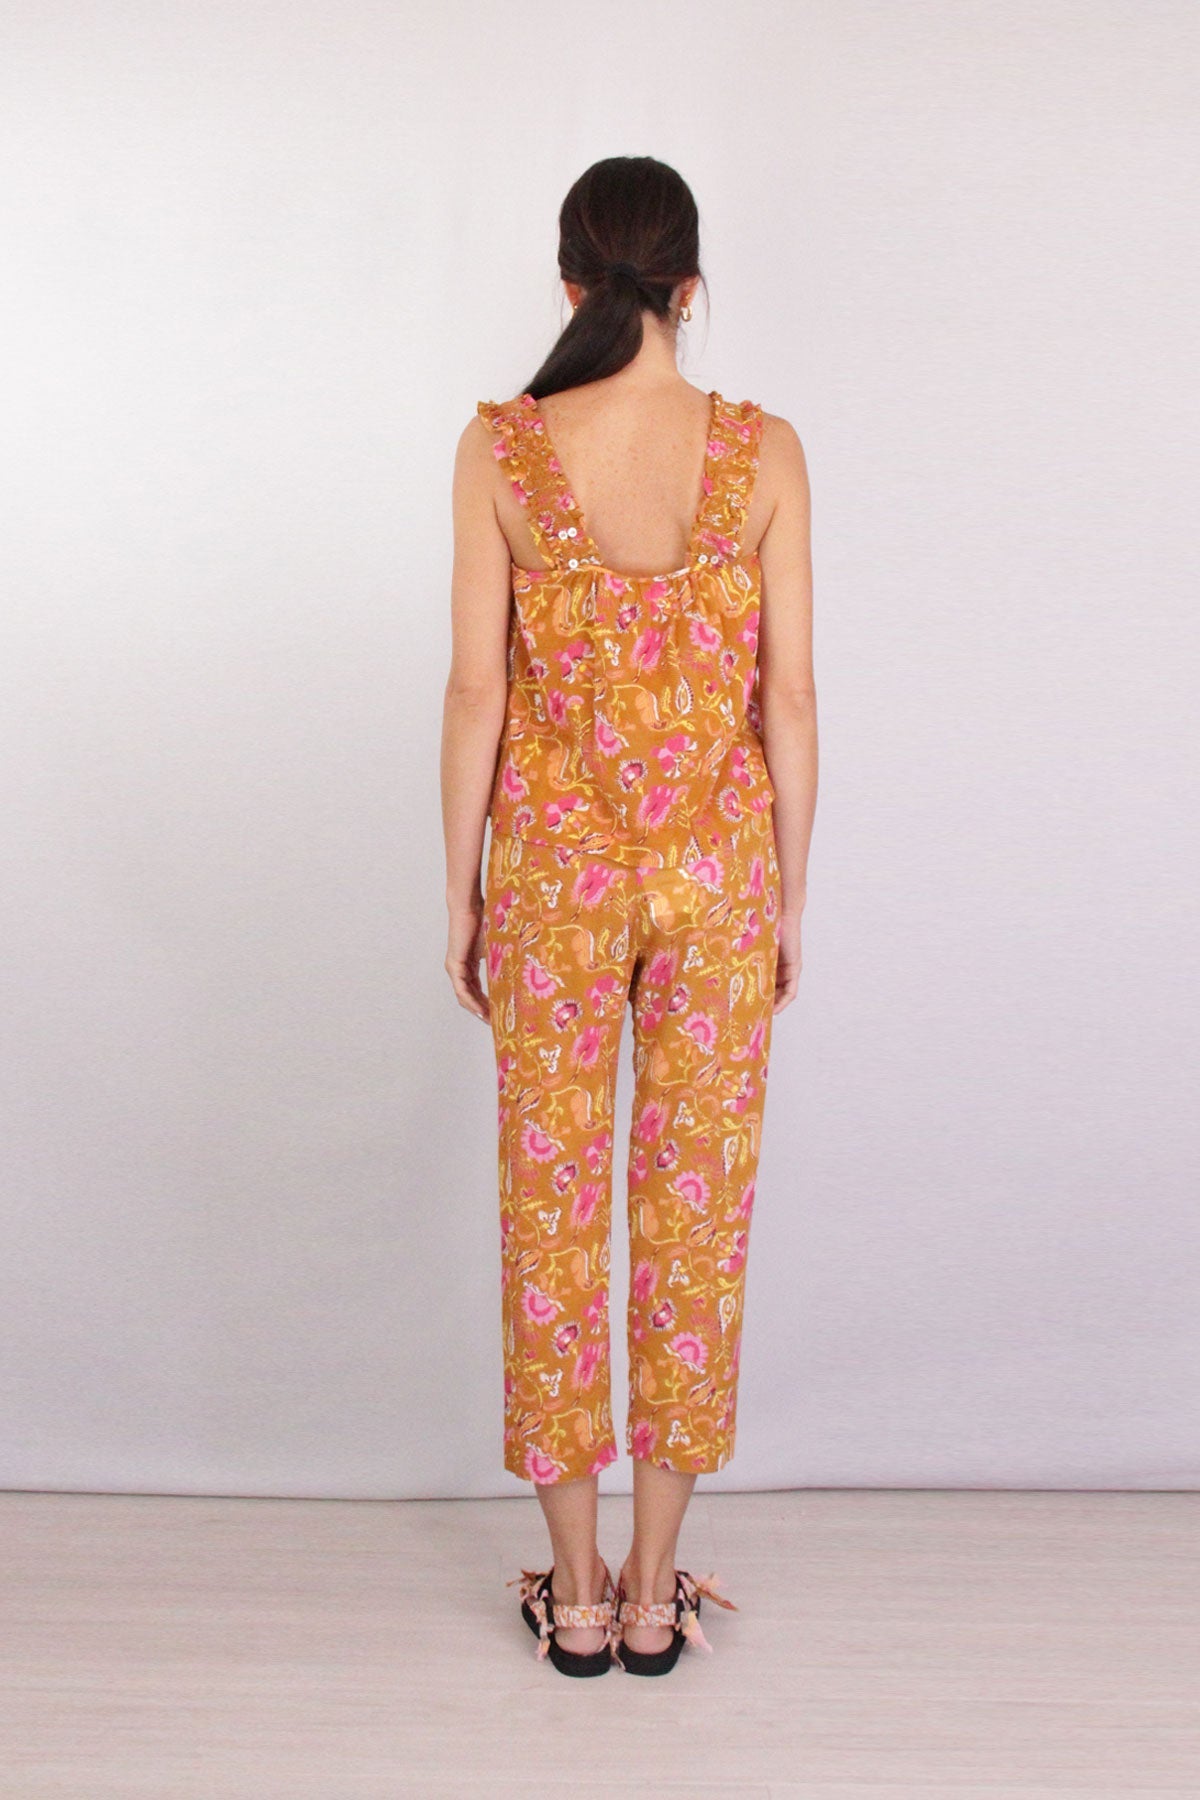 Paxtyn Pant in Sunset - shop-olivia.com